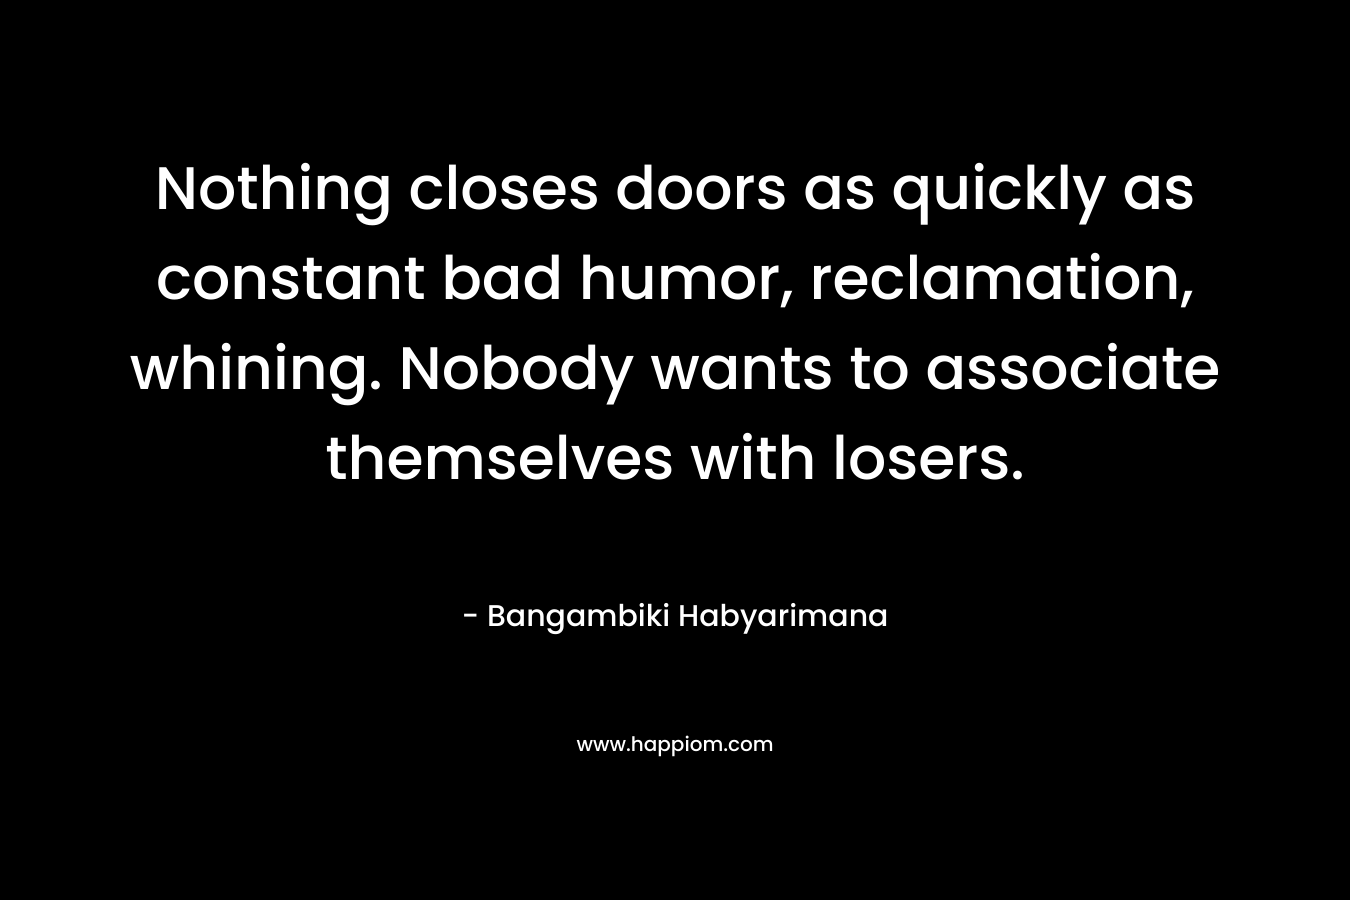 Nothing closes doors as quickly as constant bad humor, reclamation, whining. Nobody wants to associate themselves with losers. – Bangambiki Habyarimana